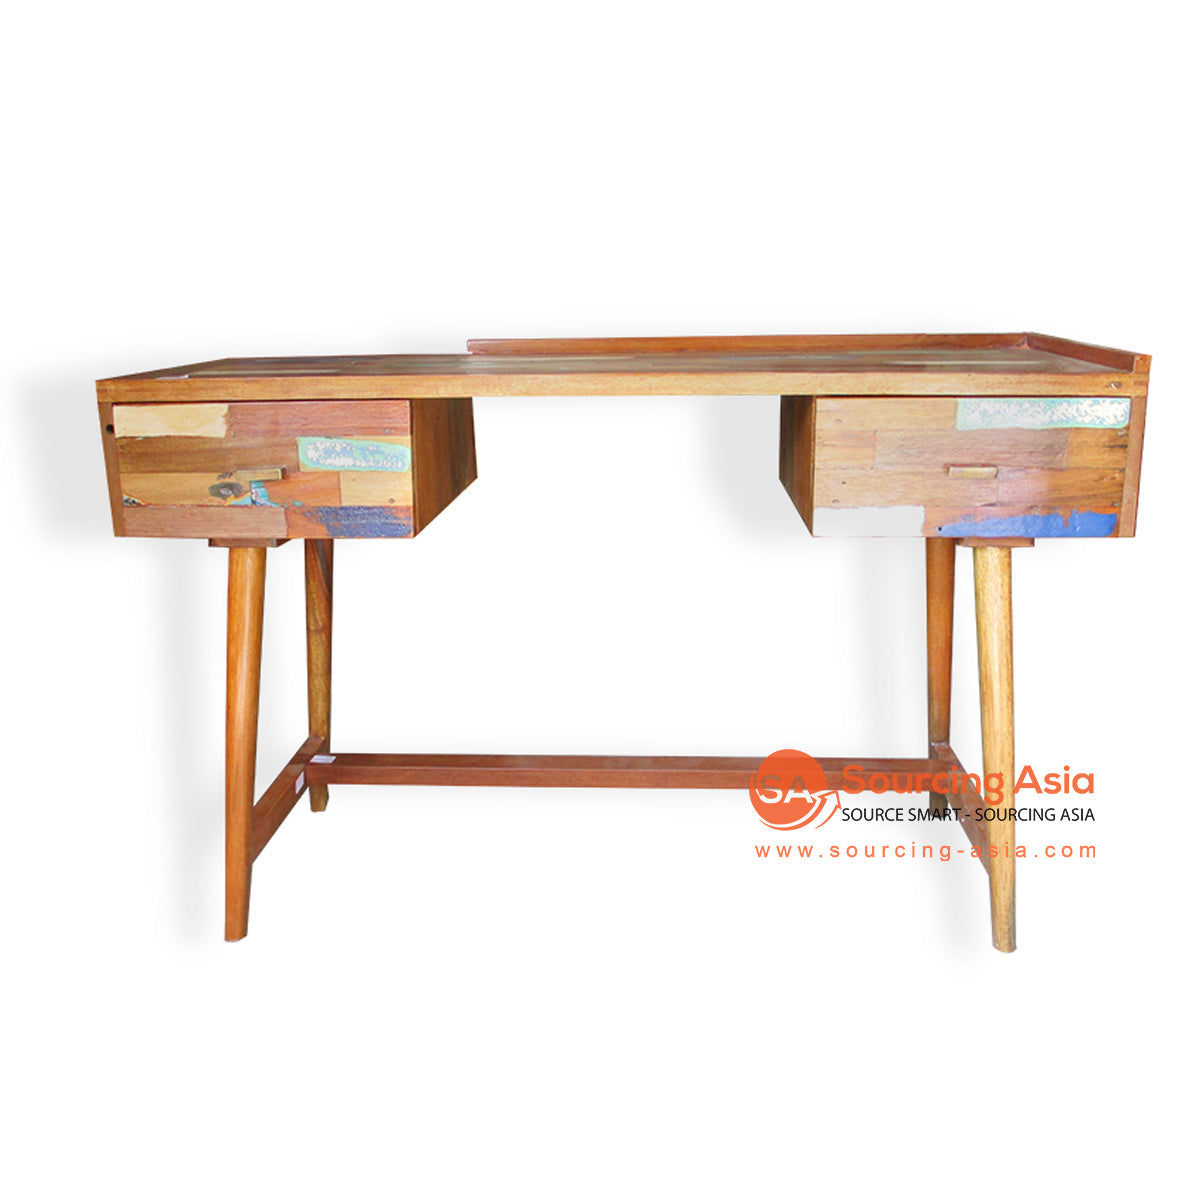 KOK005 NATURAL RECYCLED BOAT WOOD TWO DRAWERS RETRO DESK